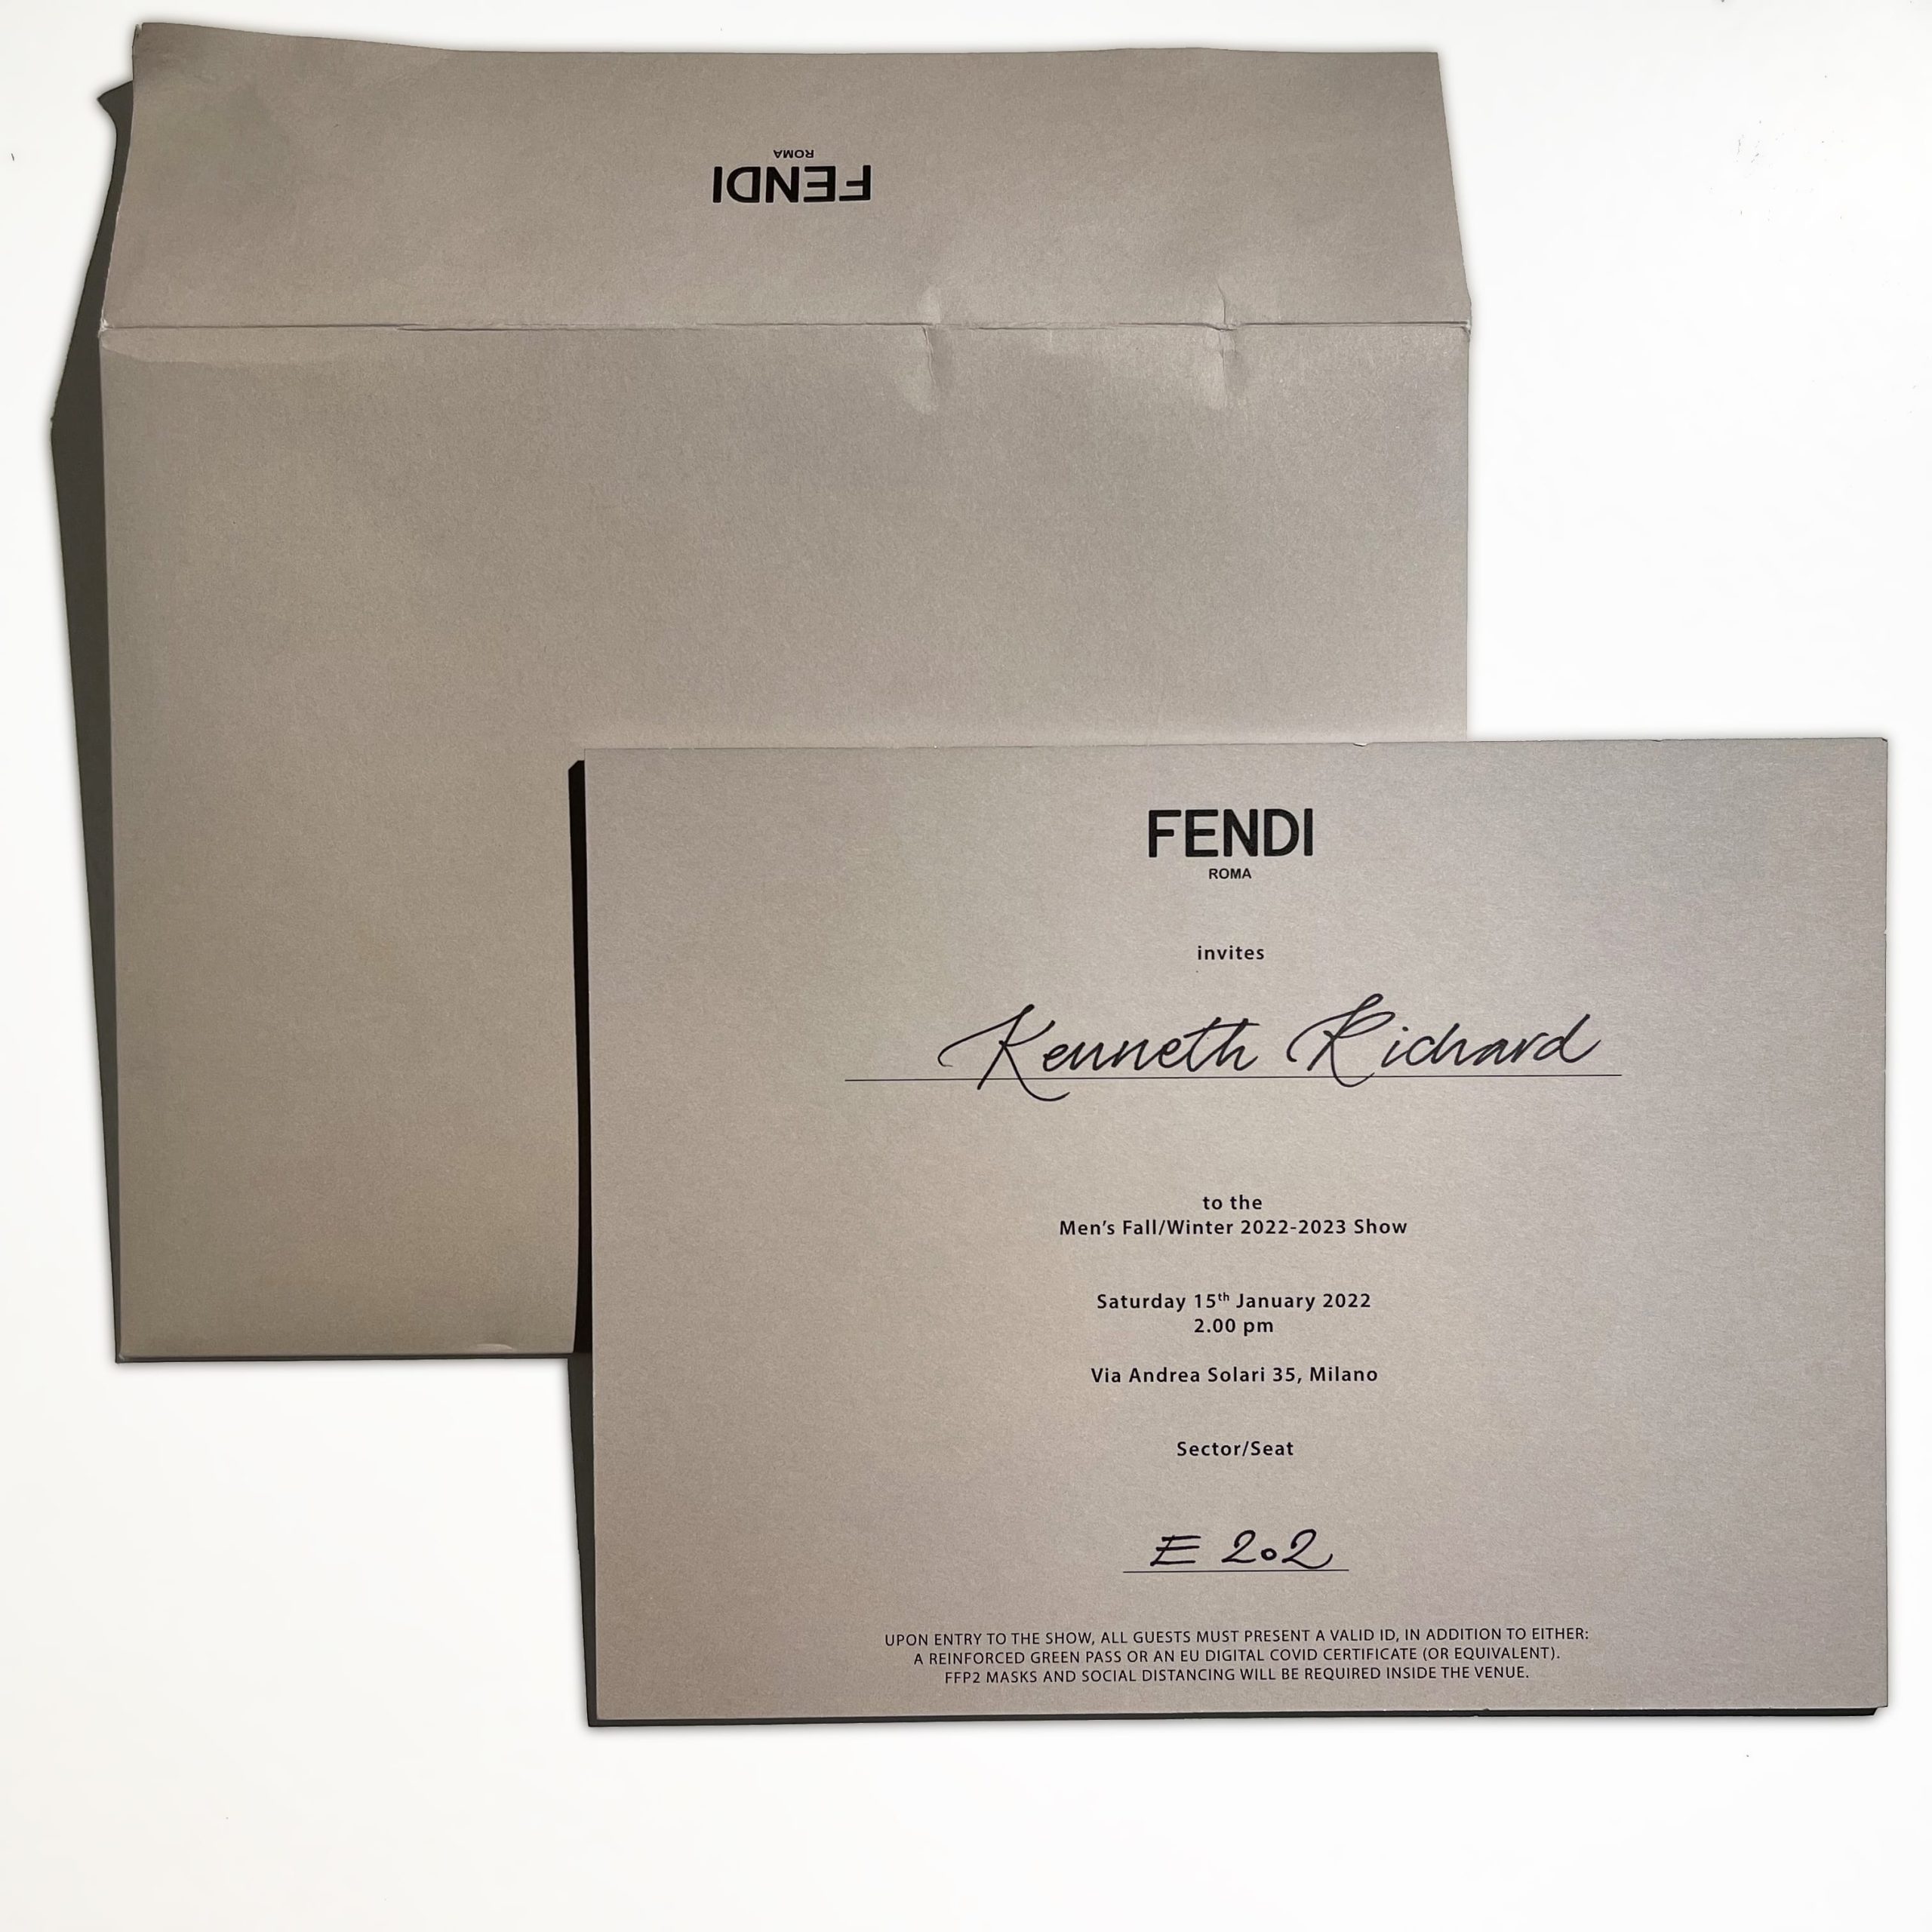 The Best Men's & Couture 2022 Fashion Show Invitations